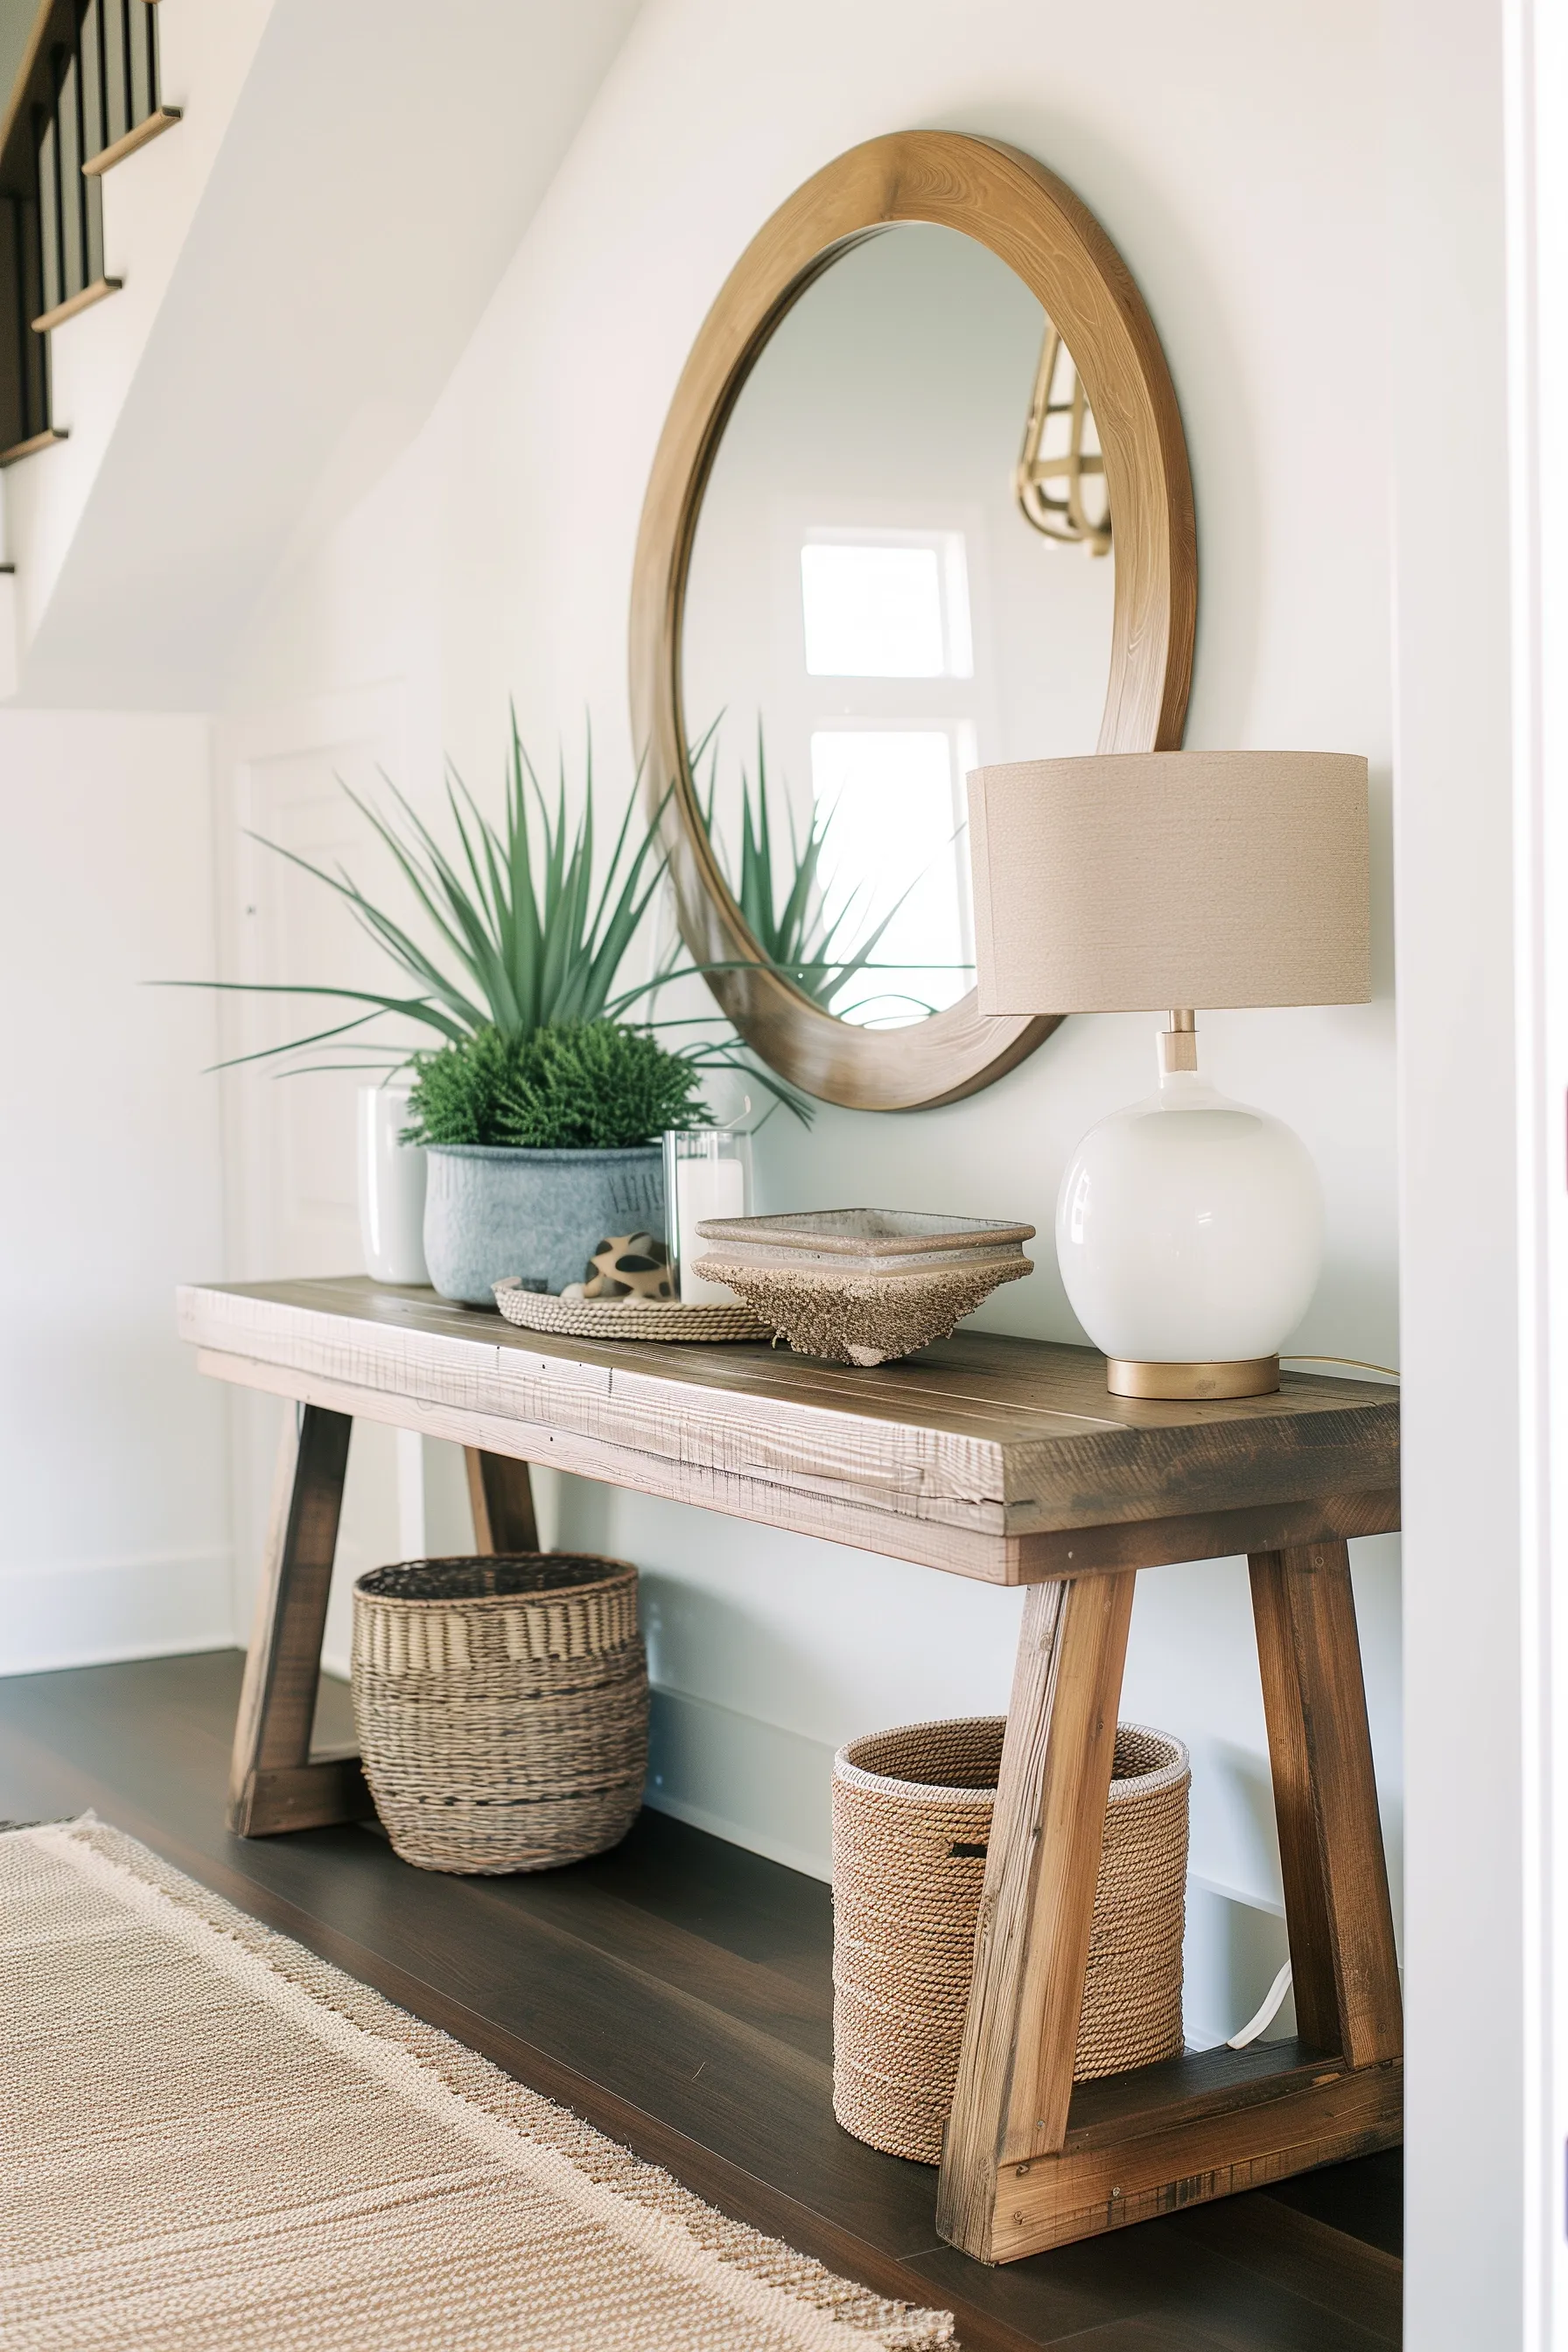 A darker wooden entry table with a lamp, plants and circular mirror